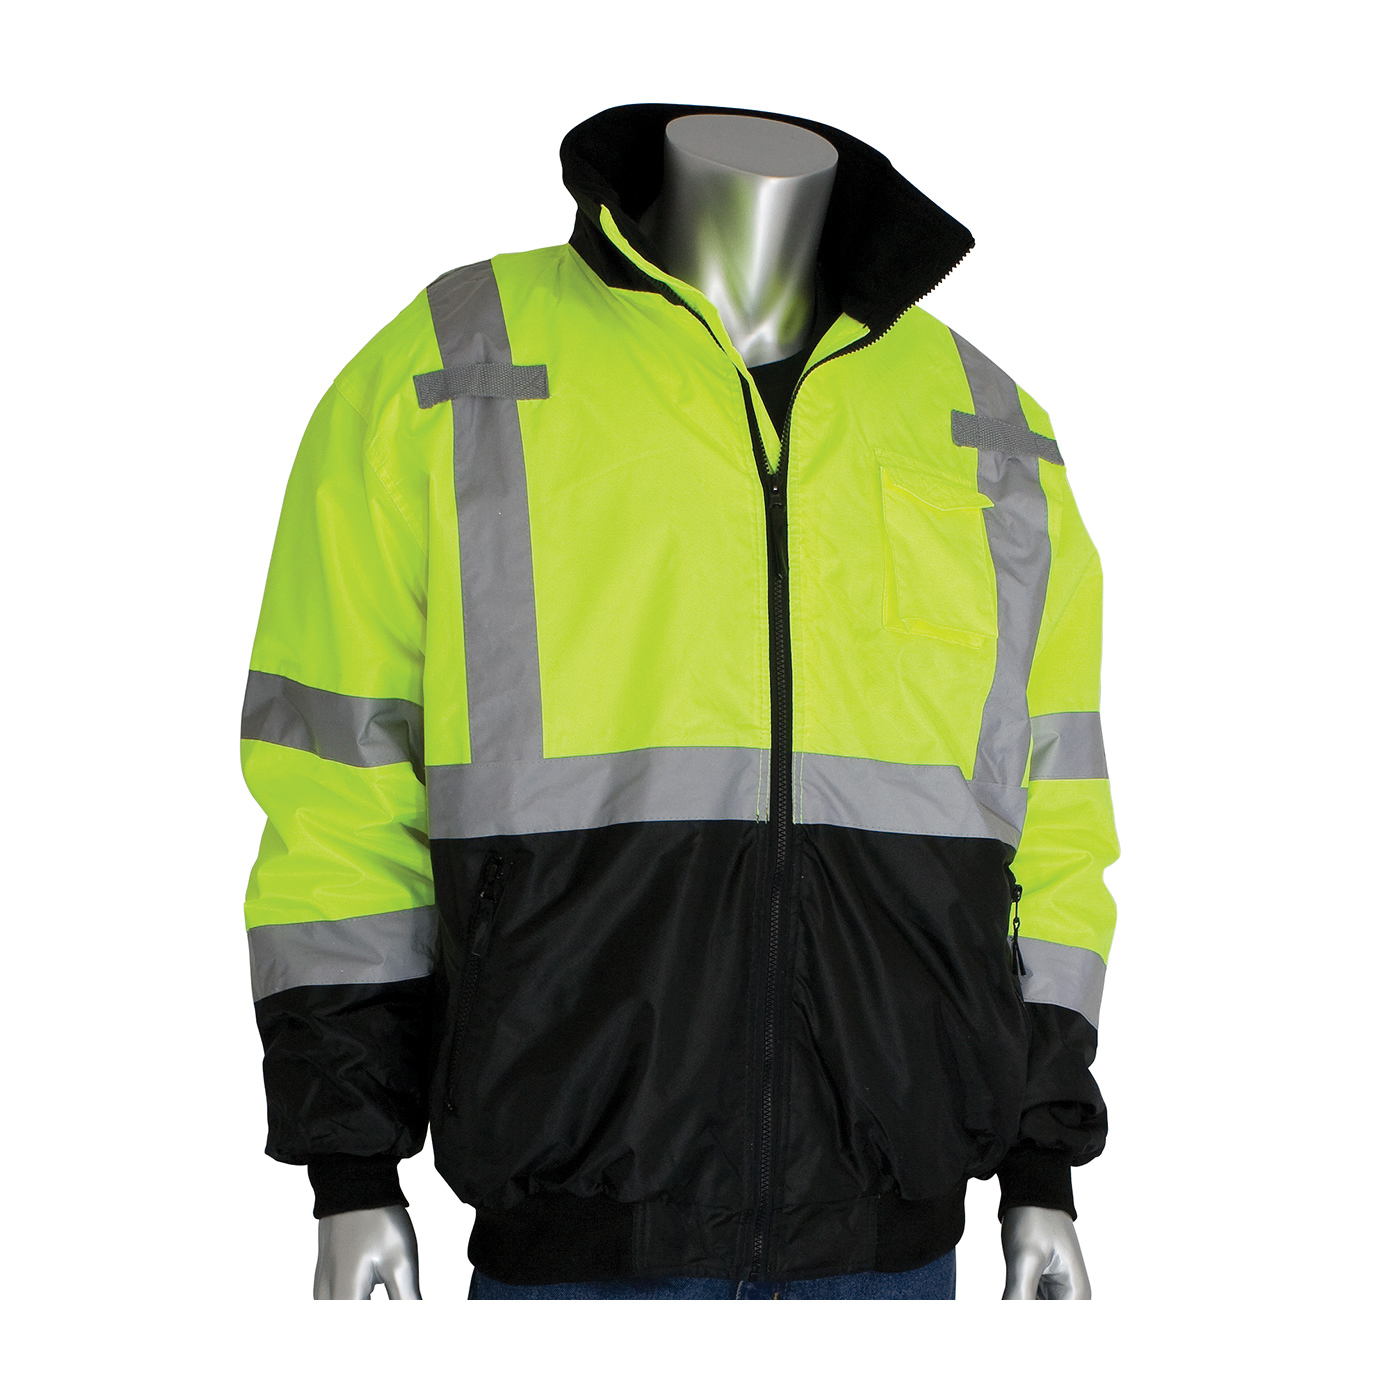 PIP® 333-1766-LY/6X Bomber Jacket With Zip-Out Fleece Liner, Hi-Viz Lime Yellow, Polyester, 78 in Chest, Resists: Water, Specifications Met: ANSI 107 Class 3 Type R